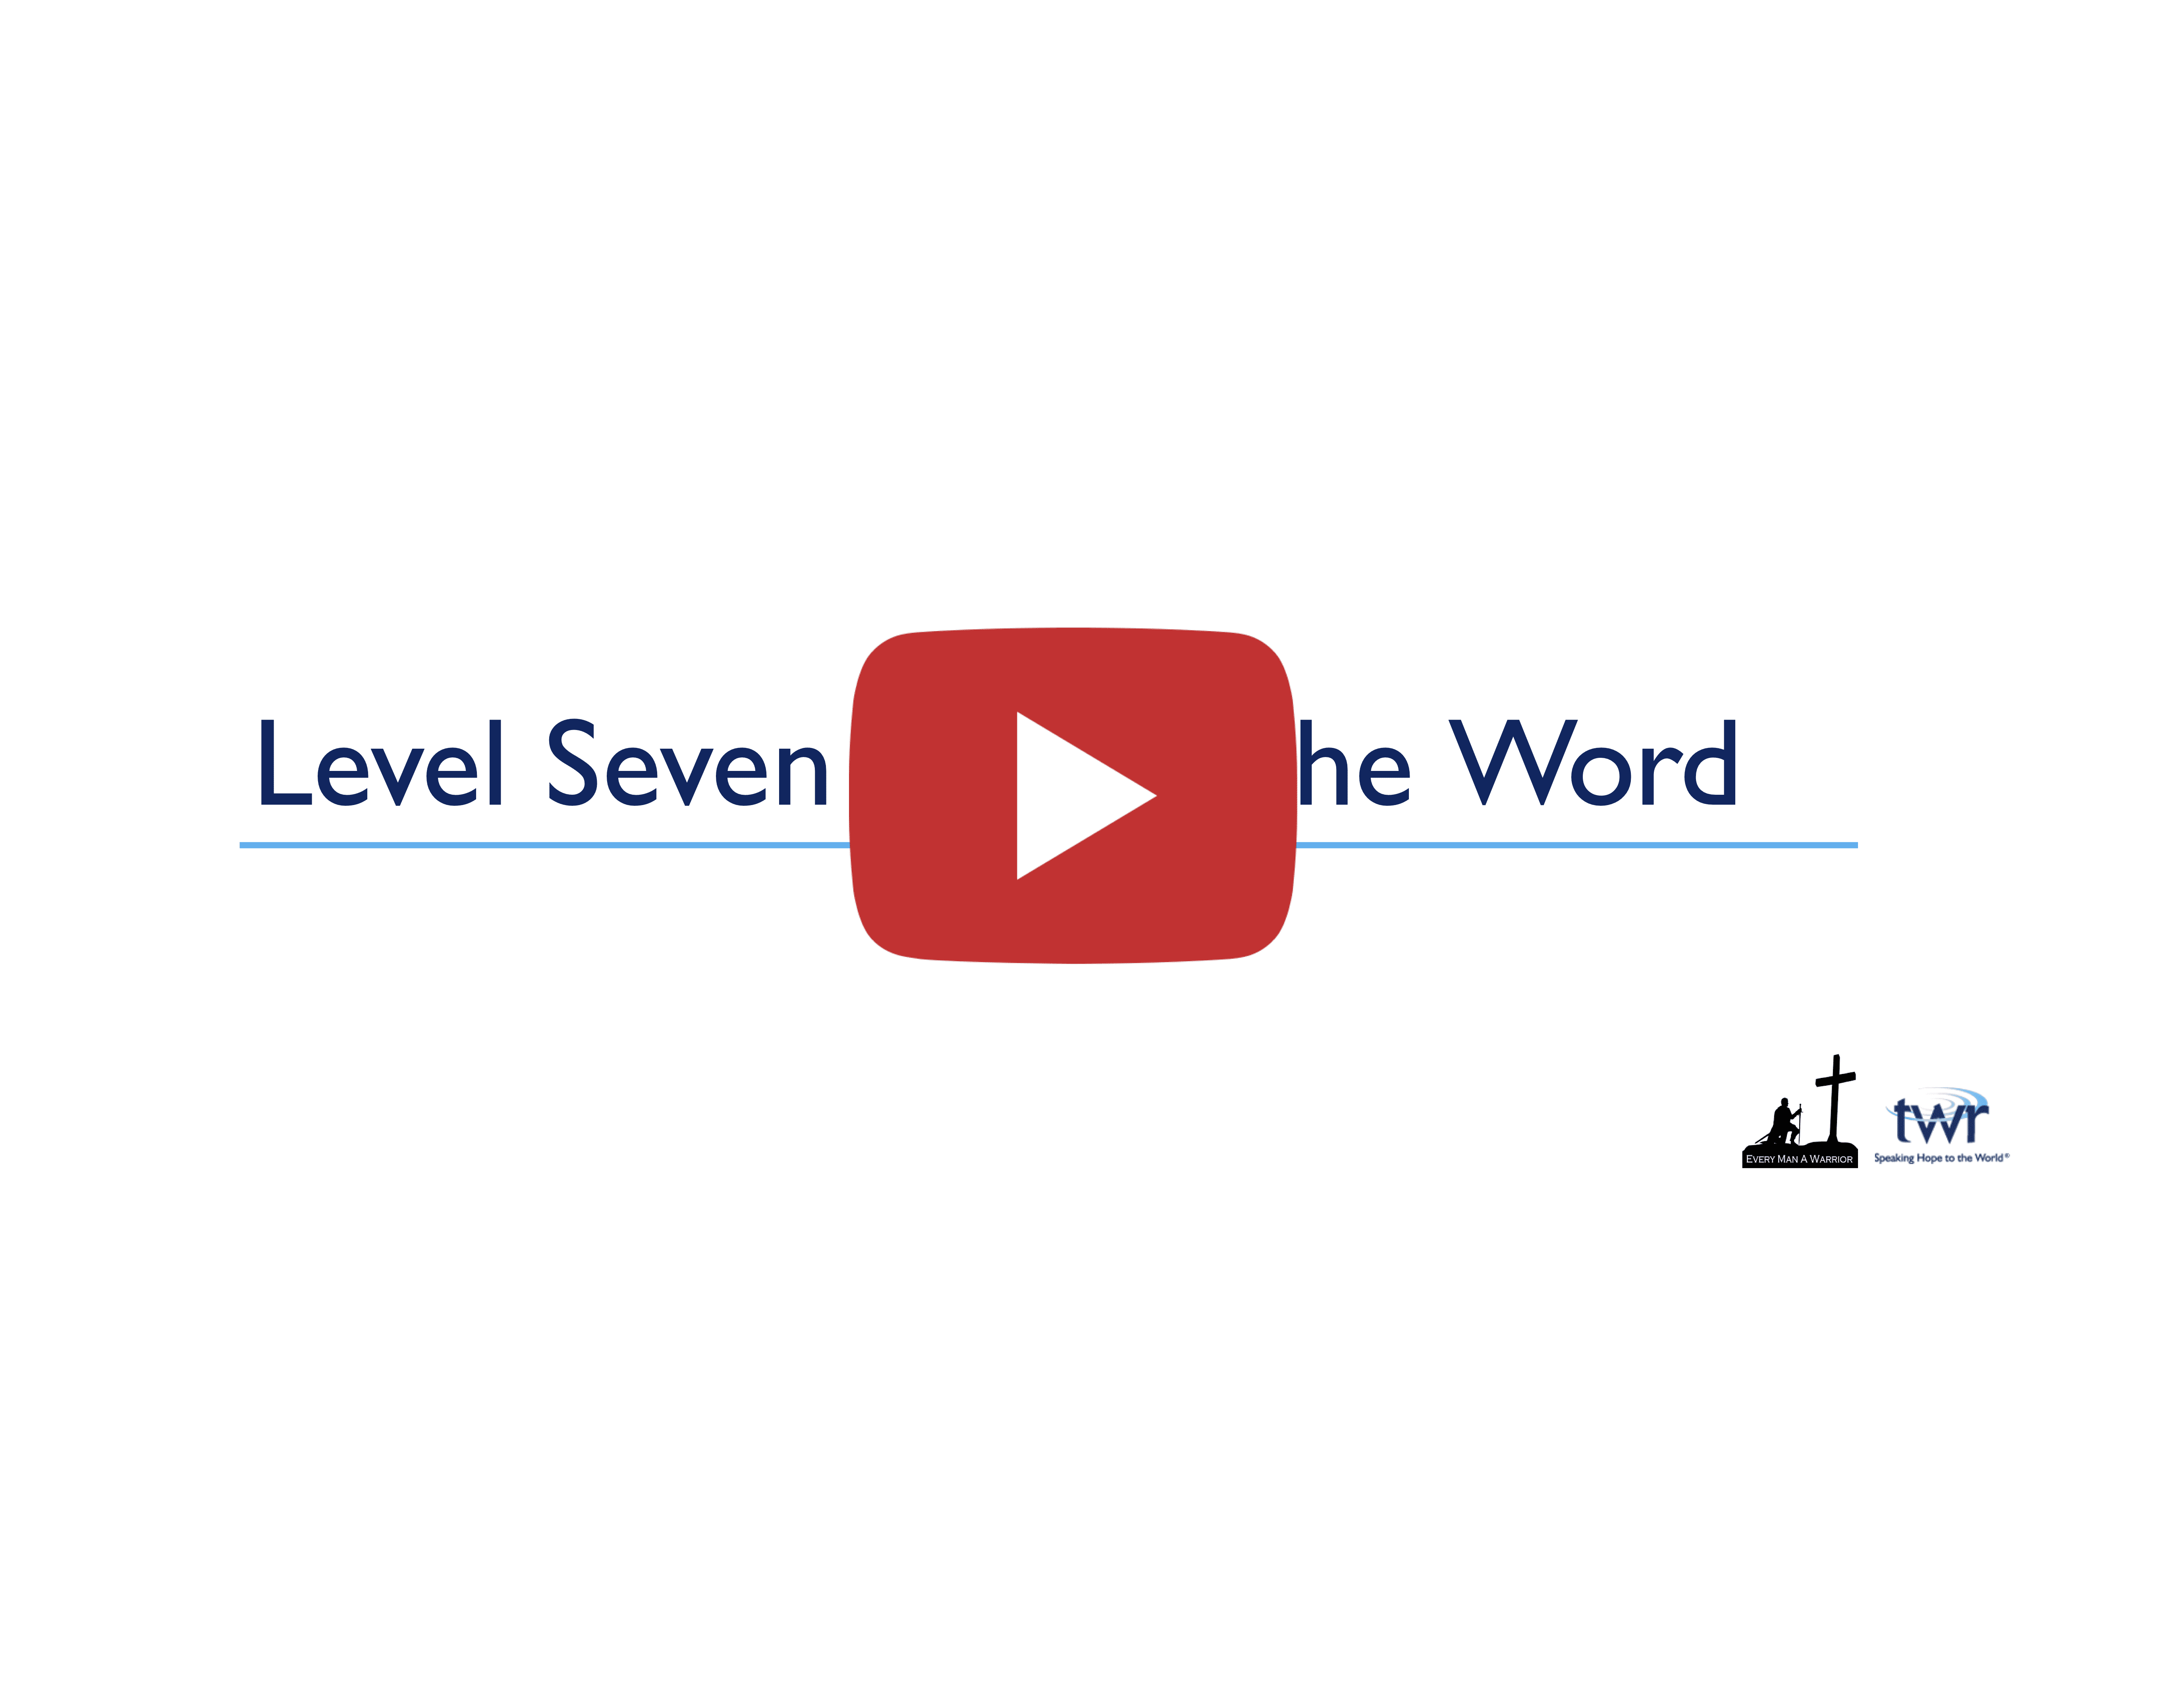 Level Seven Man of the Word